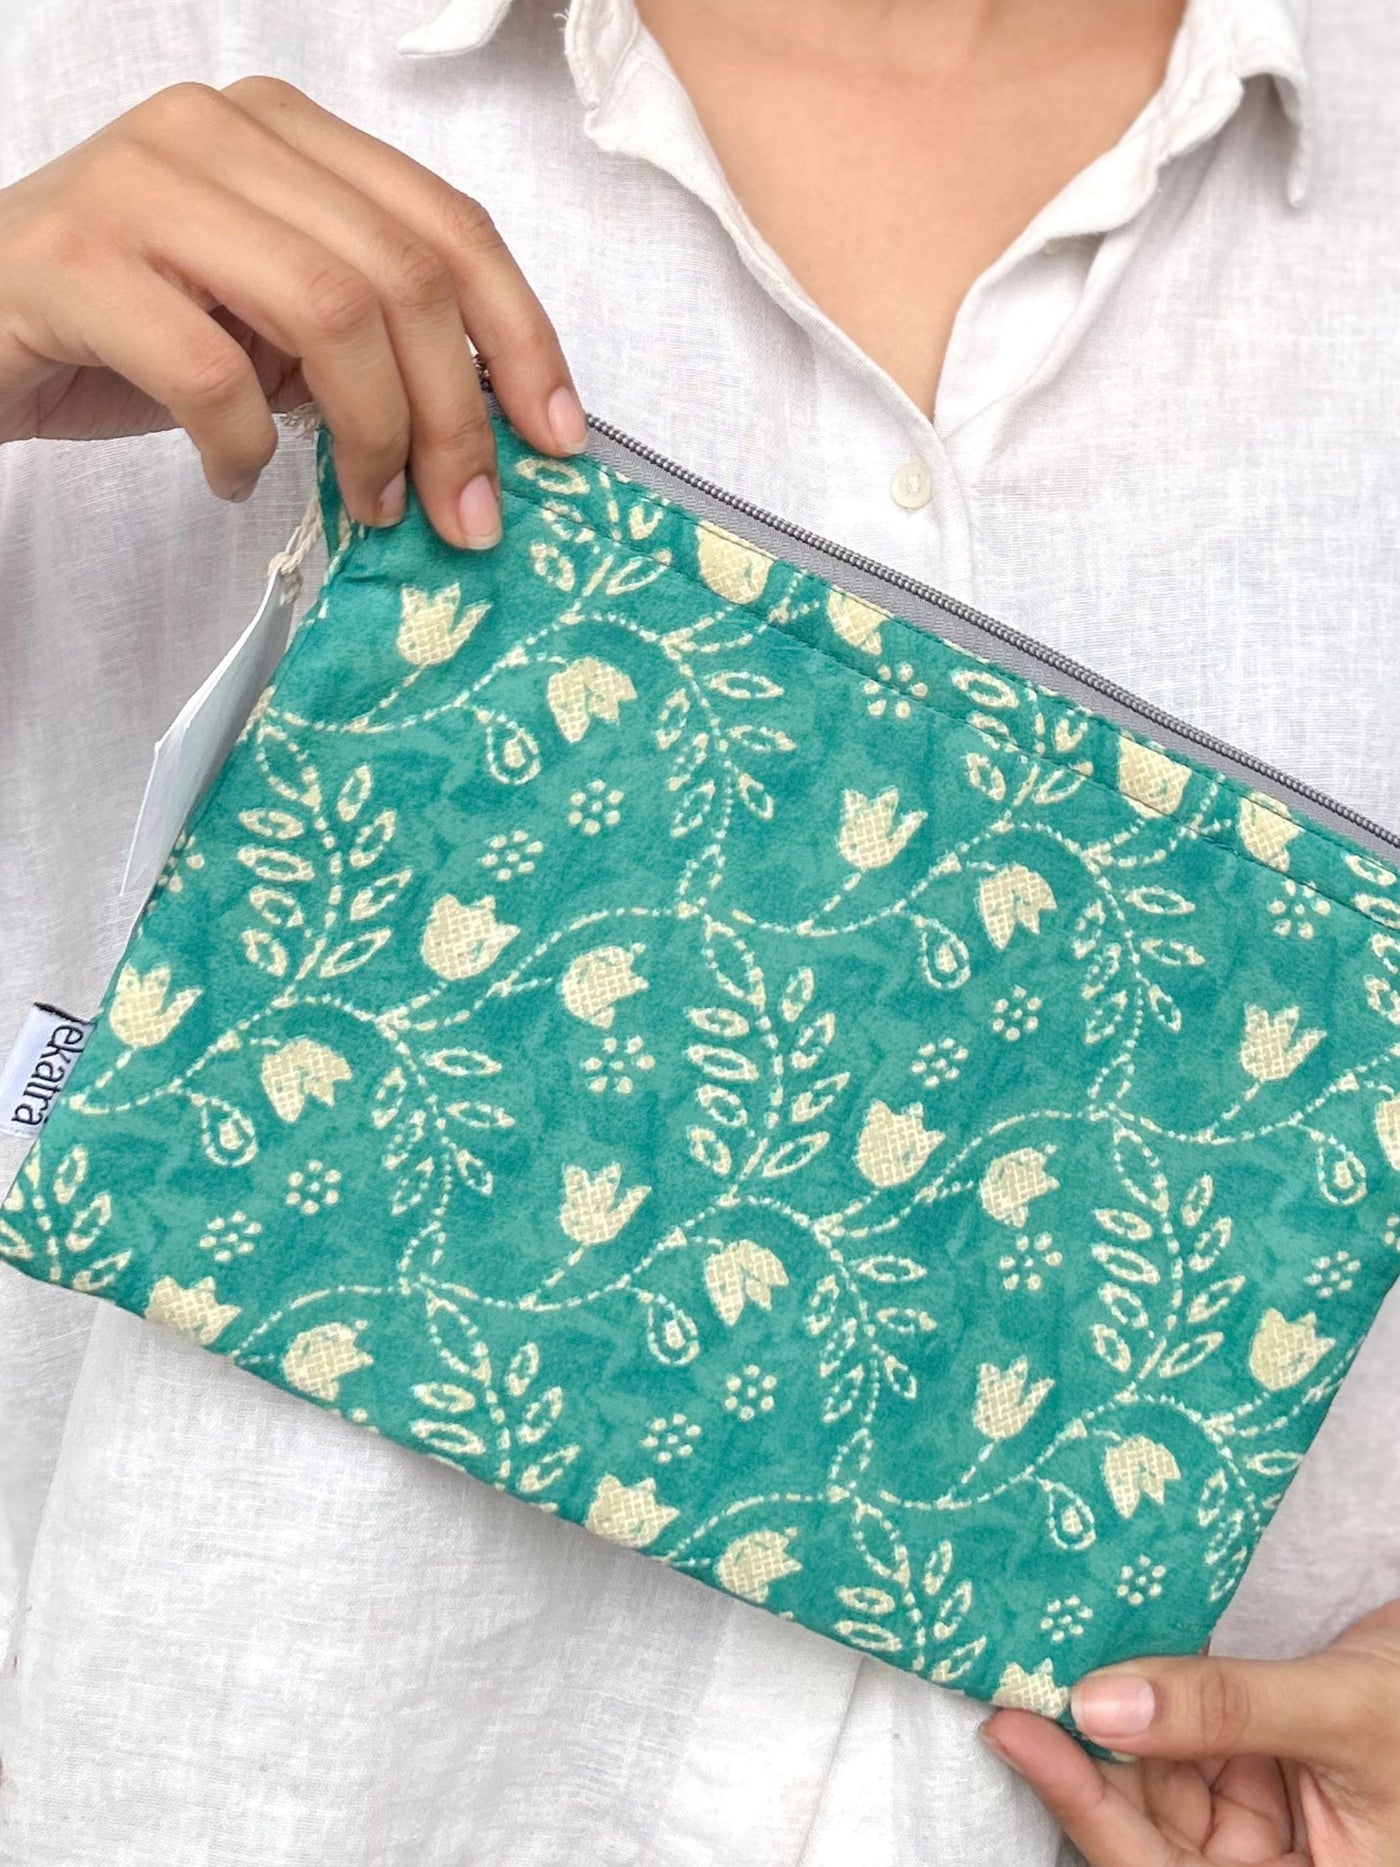 Sustainable Cotton Travel Organizer - Teal Floral